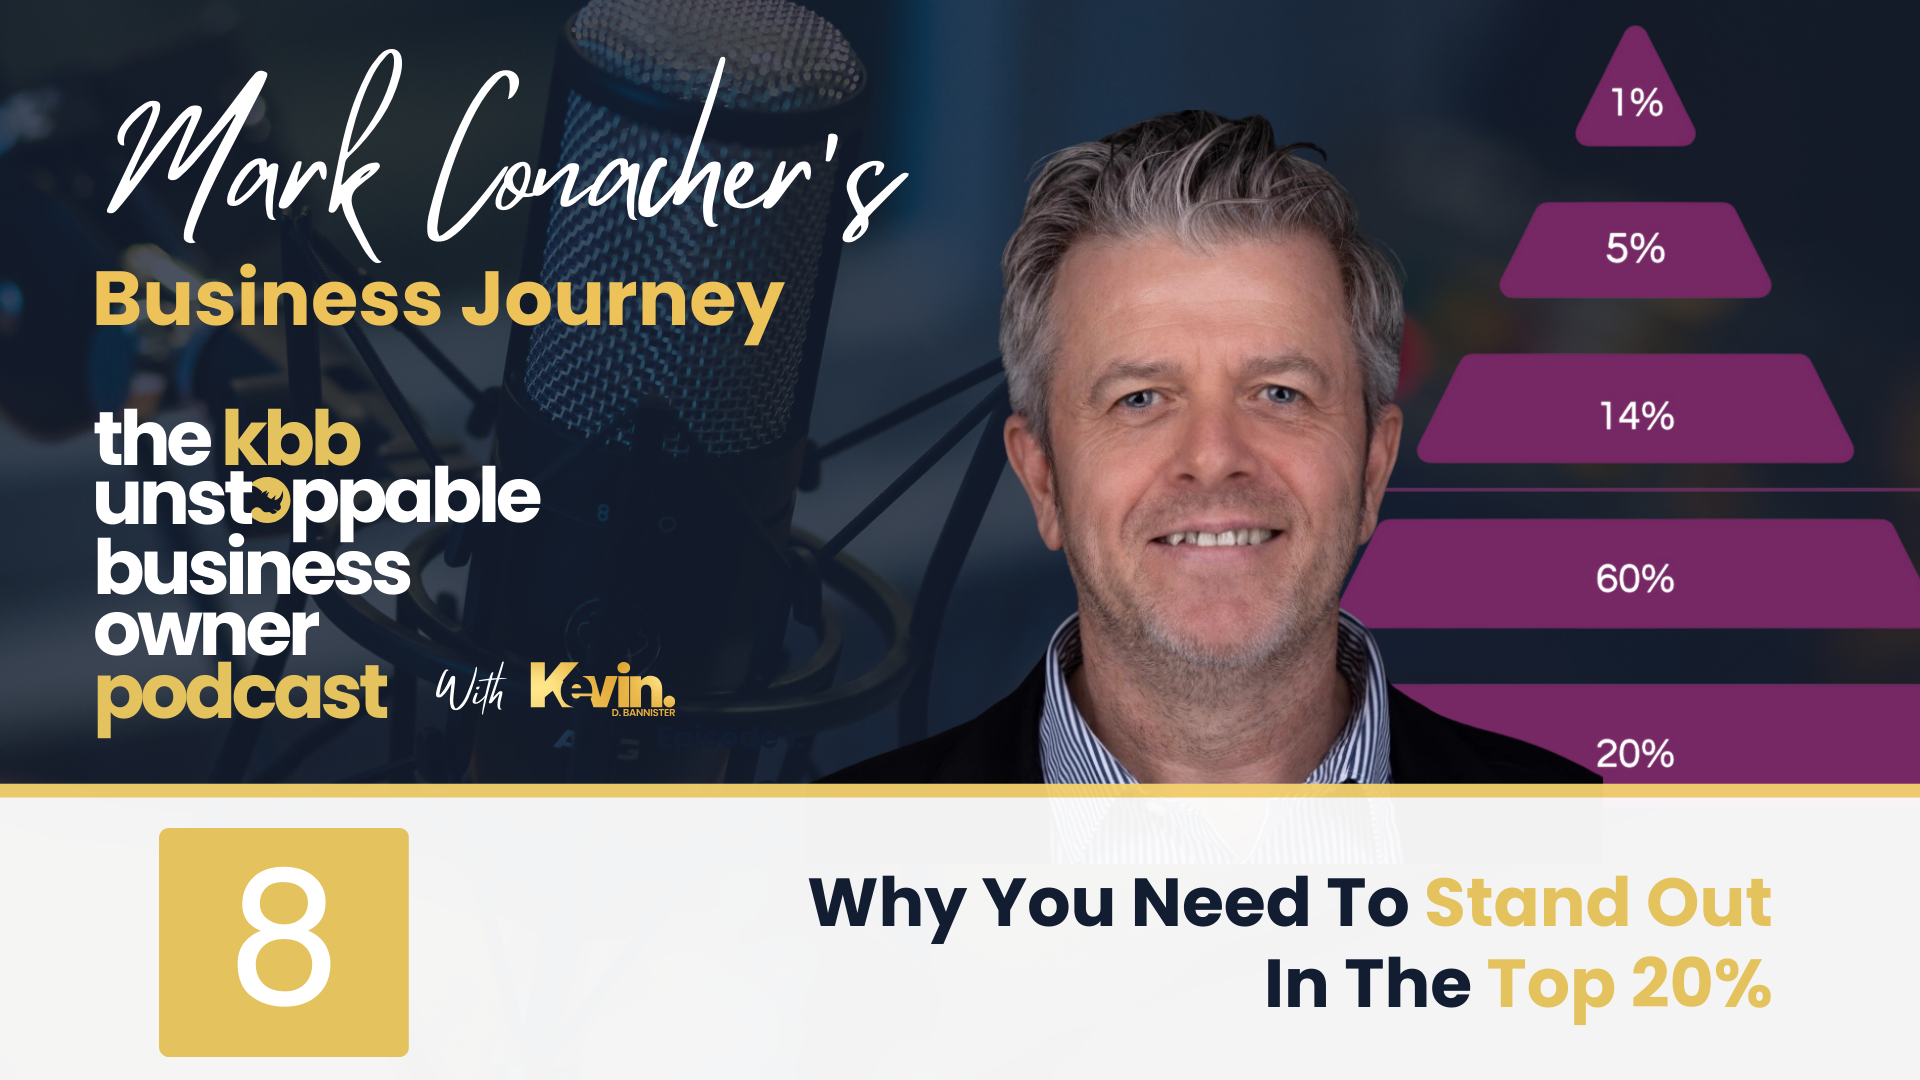 8. Mark Conacher’s Business Journey - Why You Need To Stand Out In The Top 20%